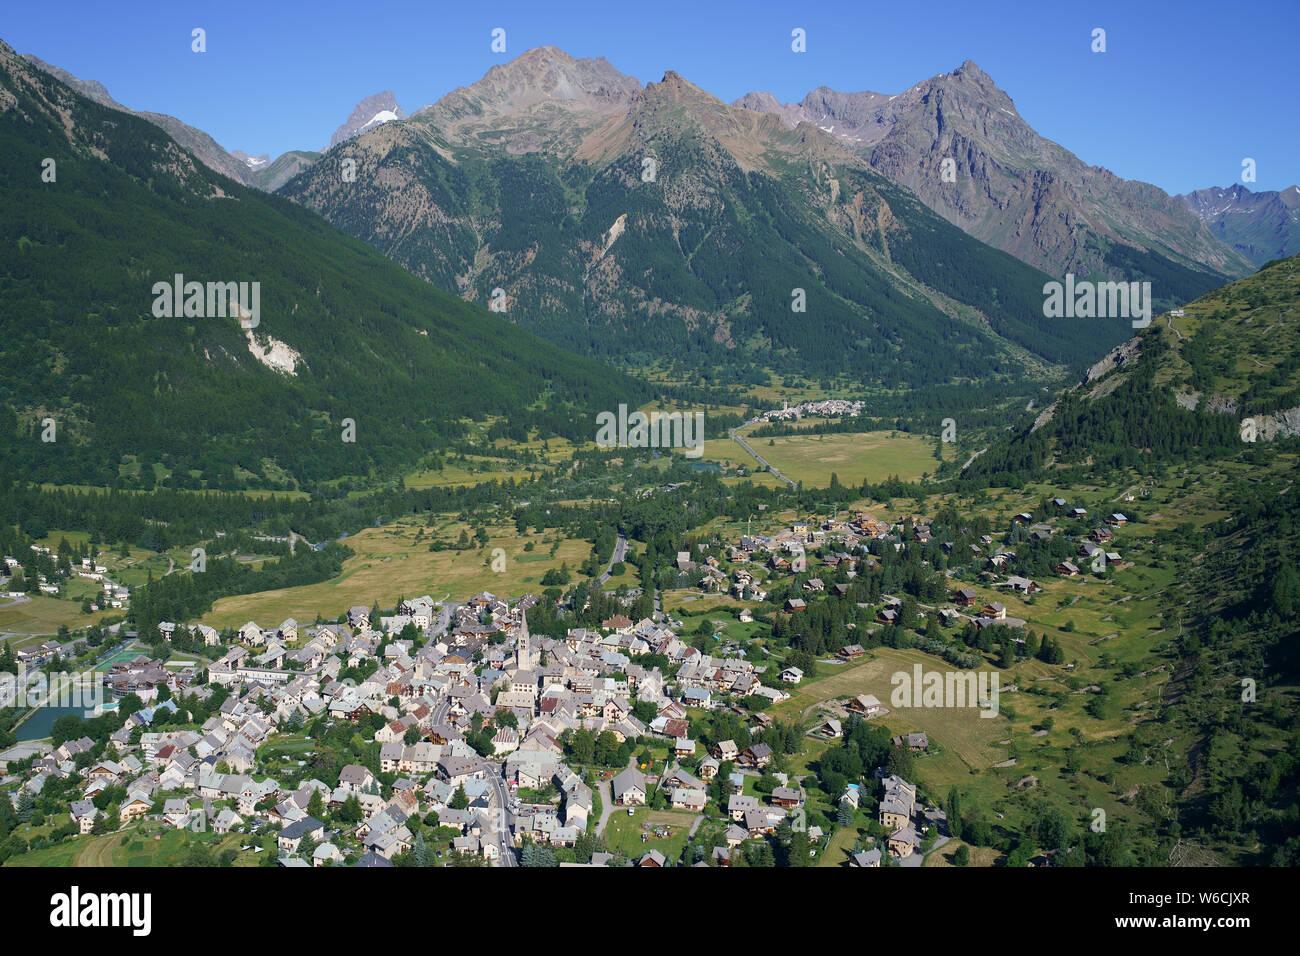 AERIAL VIEW. La Guisane Valley with the town of le Monêtier-les-Bains and the lofty peaks of Les Écrins Massif. Hautes-Alpes, France. Stock Photo